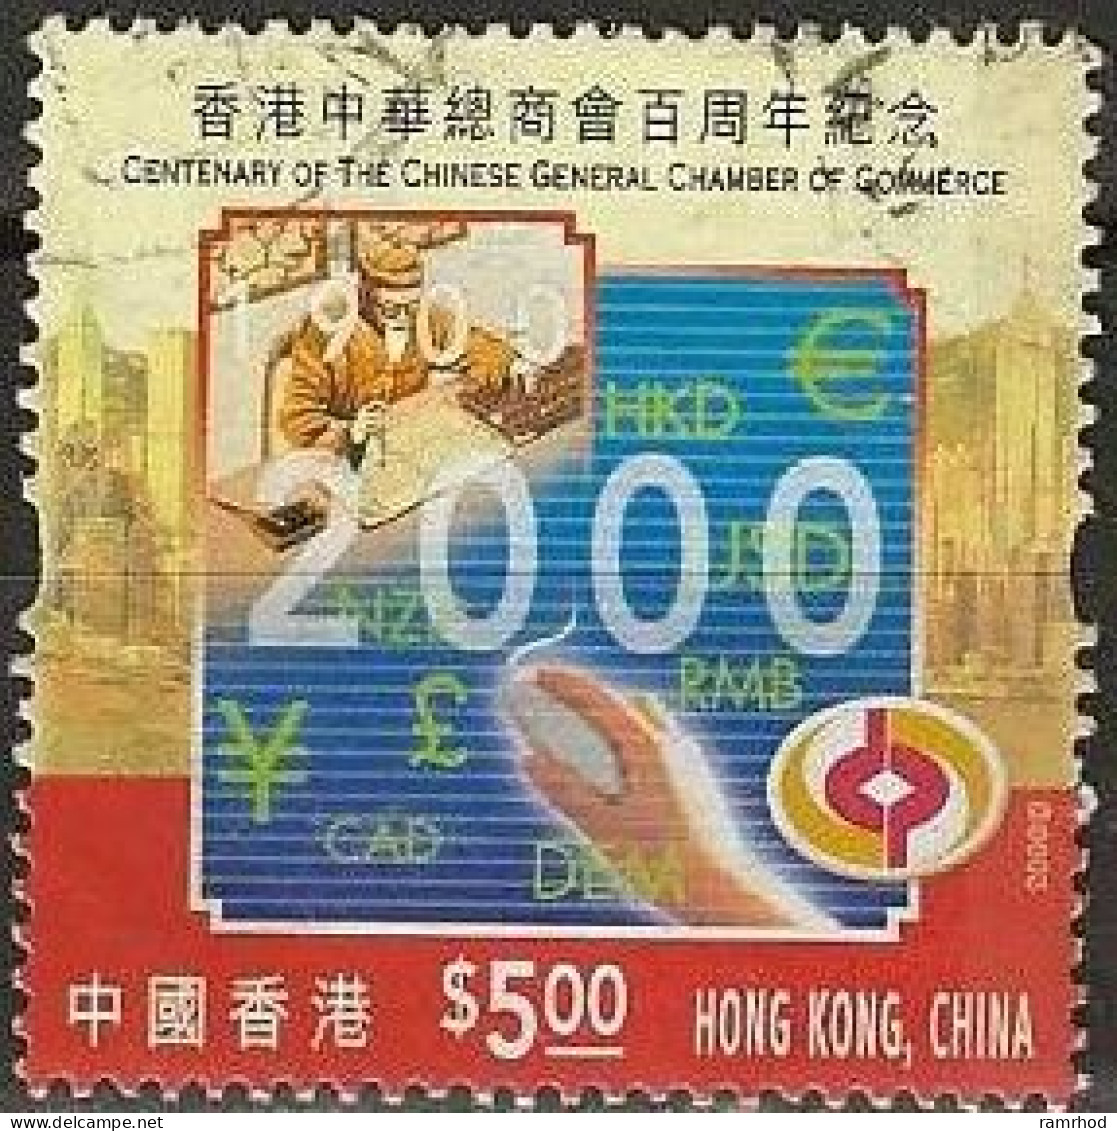 HONG KONG 2000 Centenary Of General Chamber Of Commerce - $5 - Man Using Abacus And Hand Using Mouse FU - Gebraucht